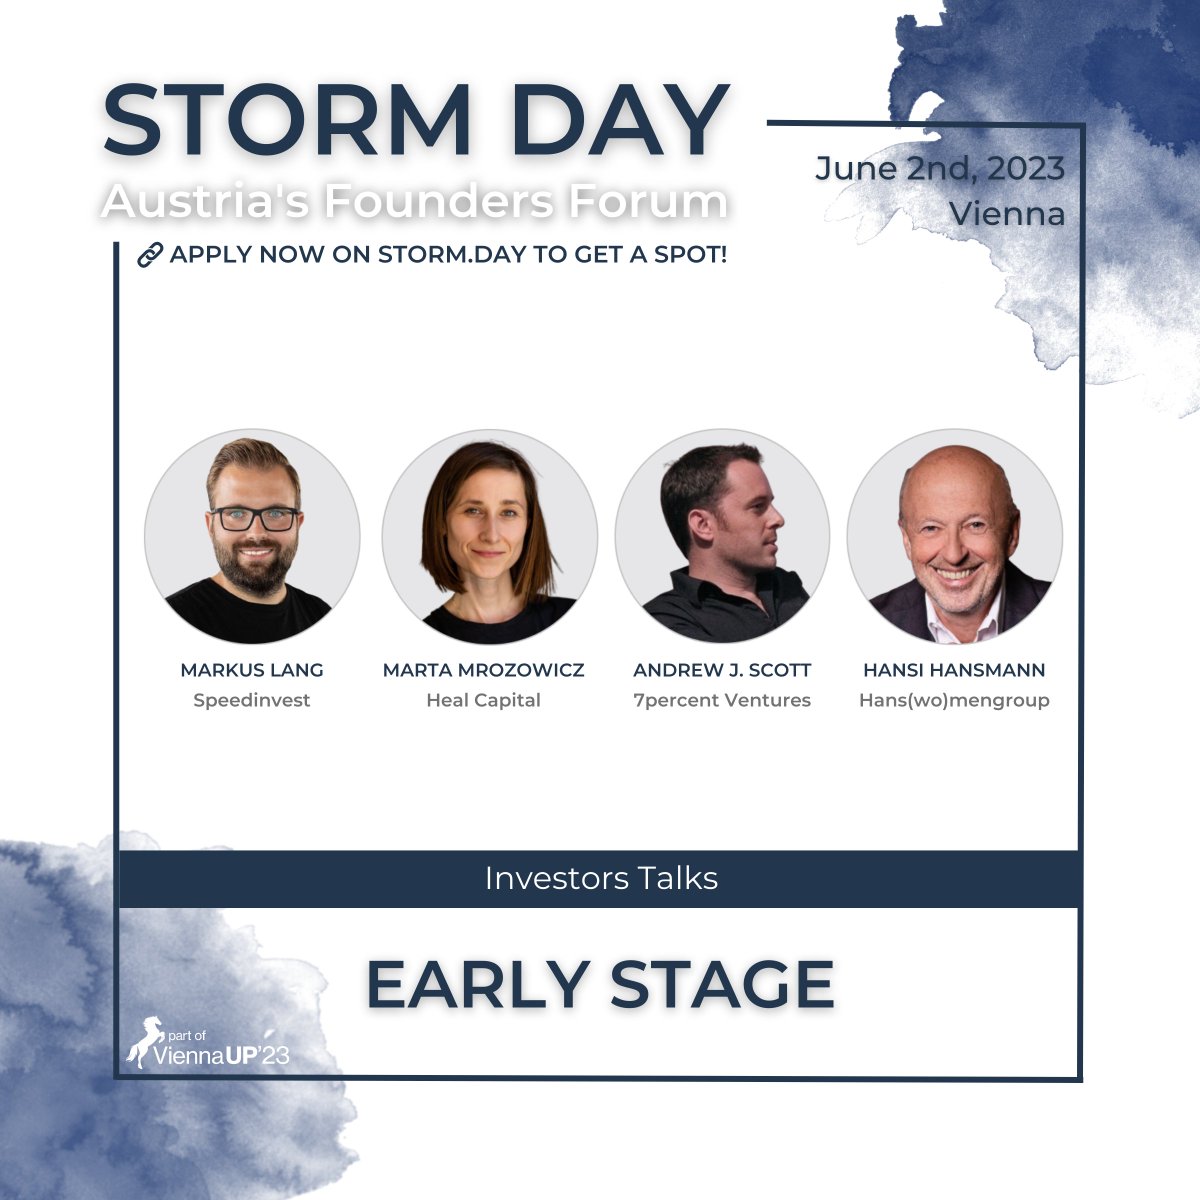 🌟 Join us for an enlightening panel discussion at STORM DAY: Investors Talk on Early-Stage Startups!

🔗Register now ( ONLY A FEW SPOTS LEFT!): storm.day  

#STORMDAY #InvestorsTalk #EarlyStageStartups #StartupFunding #Entrepreneurship #VC #startups #entrepreneurs